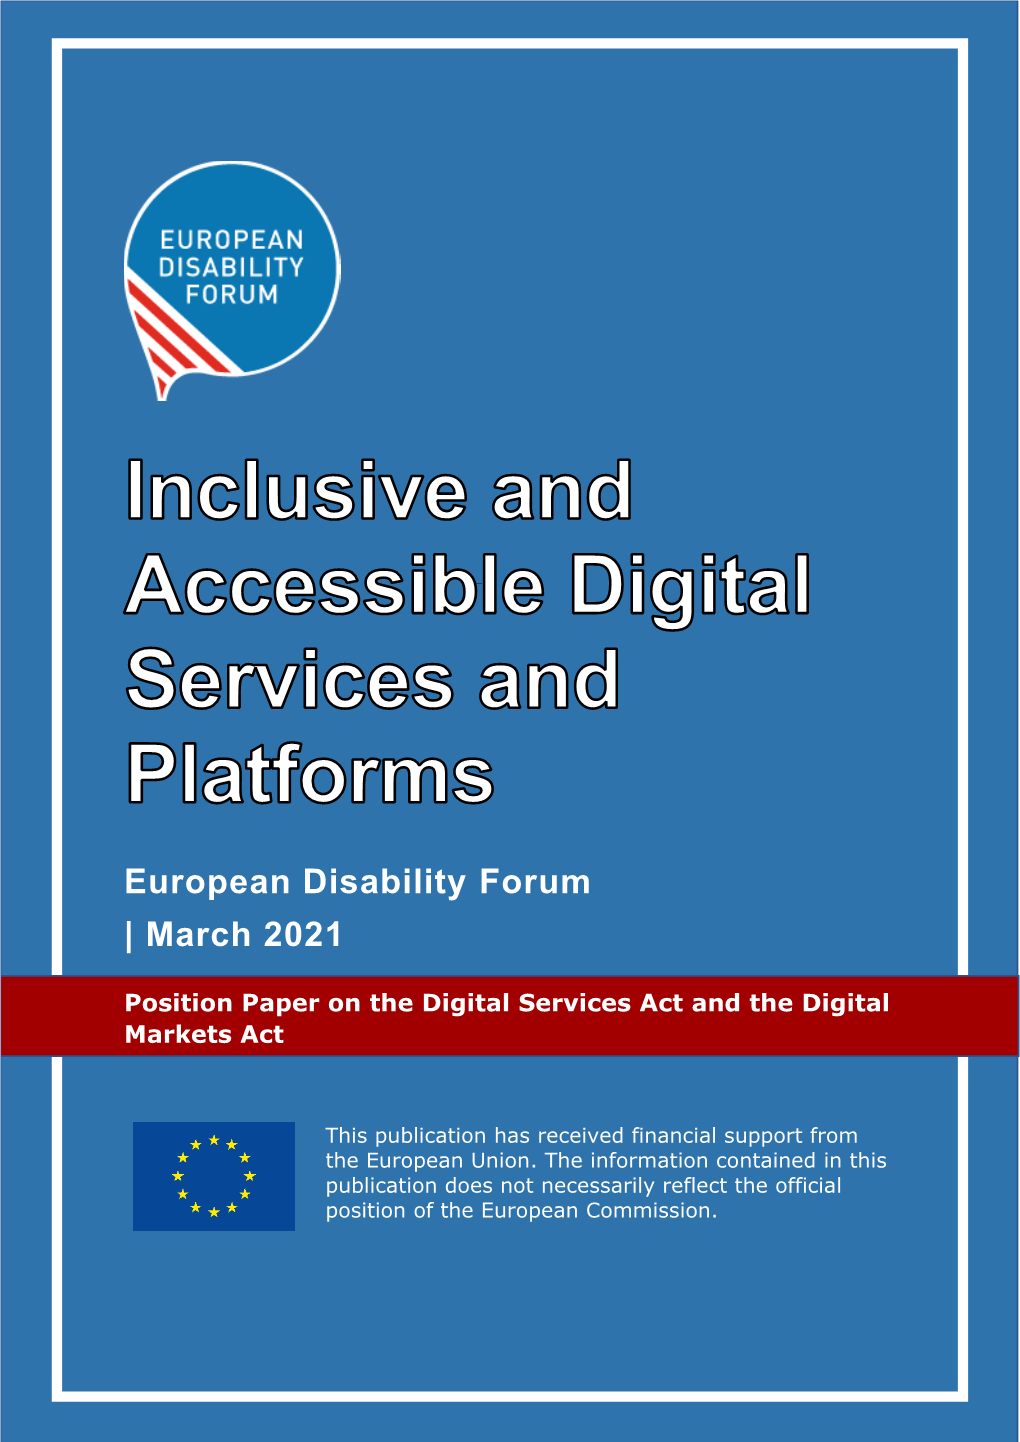 EDF Position Paper on the Digital Services Act and Digital Markets